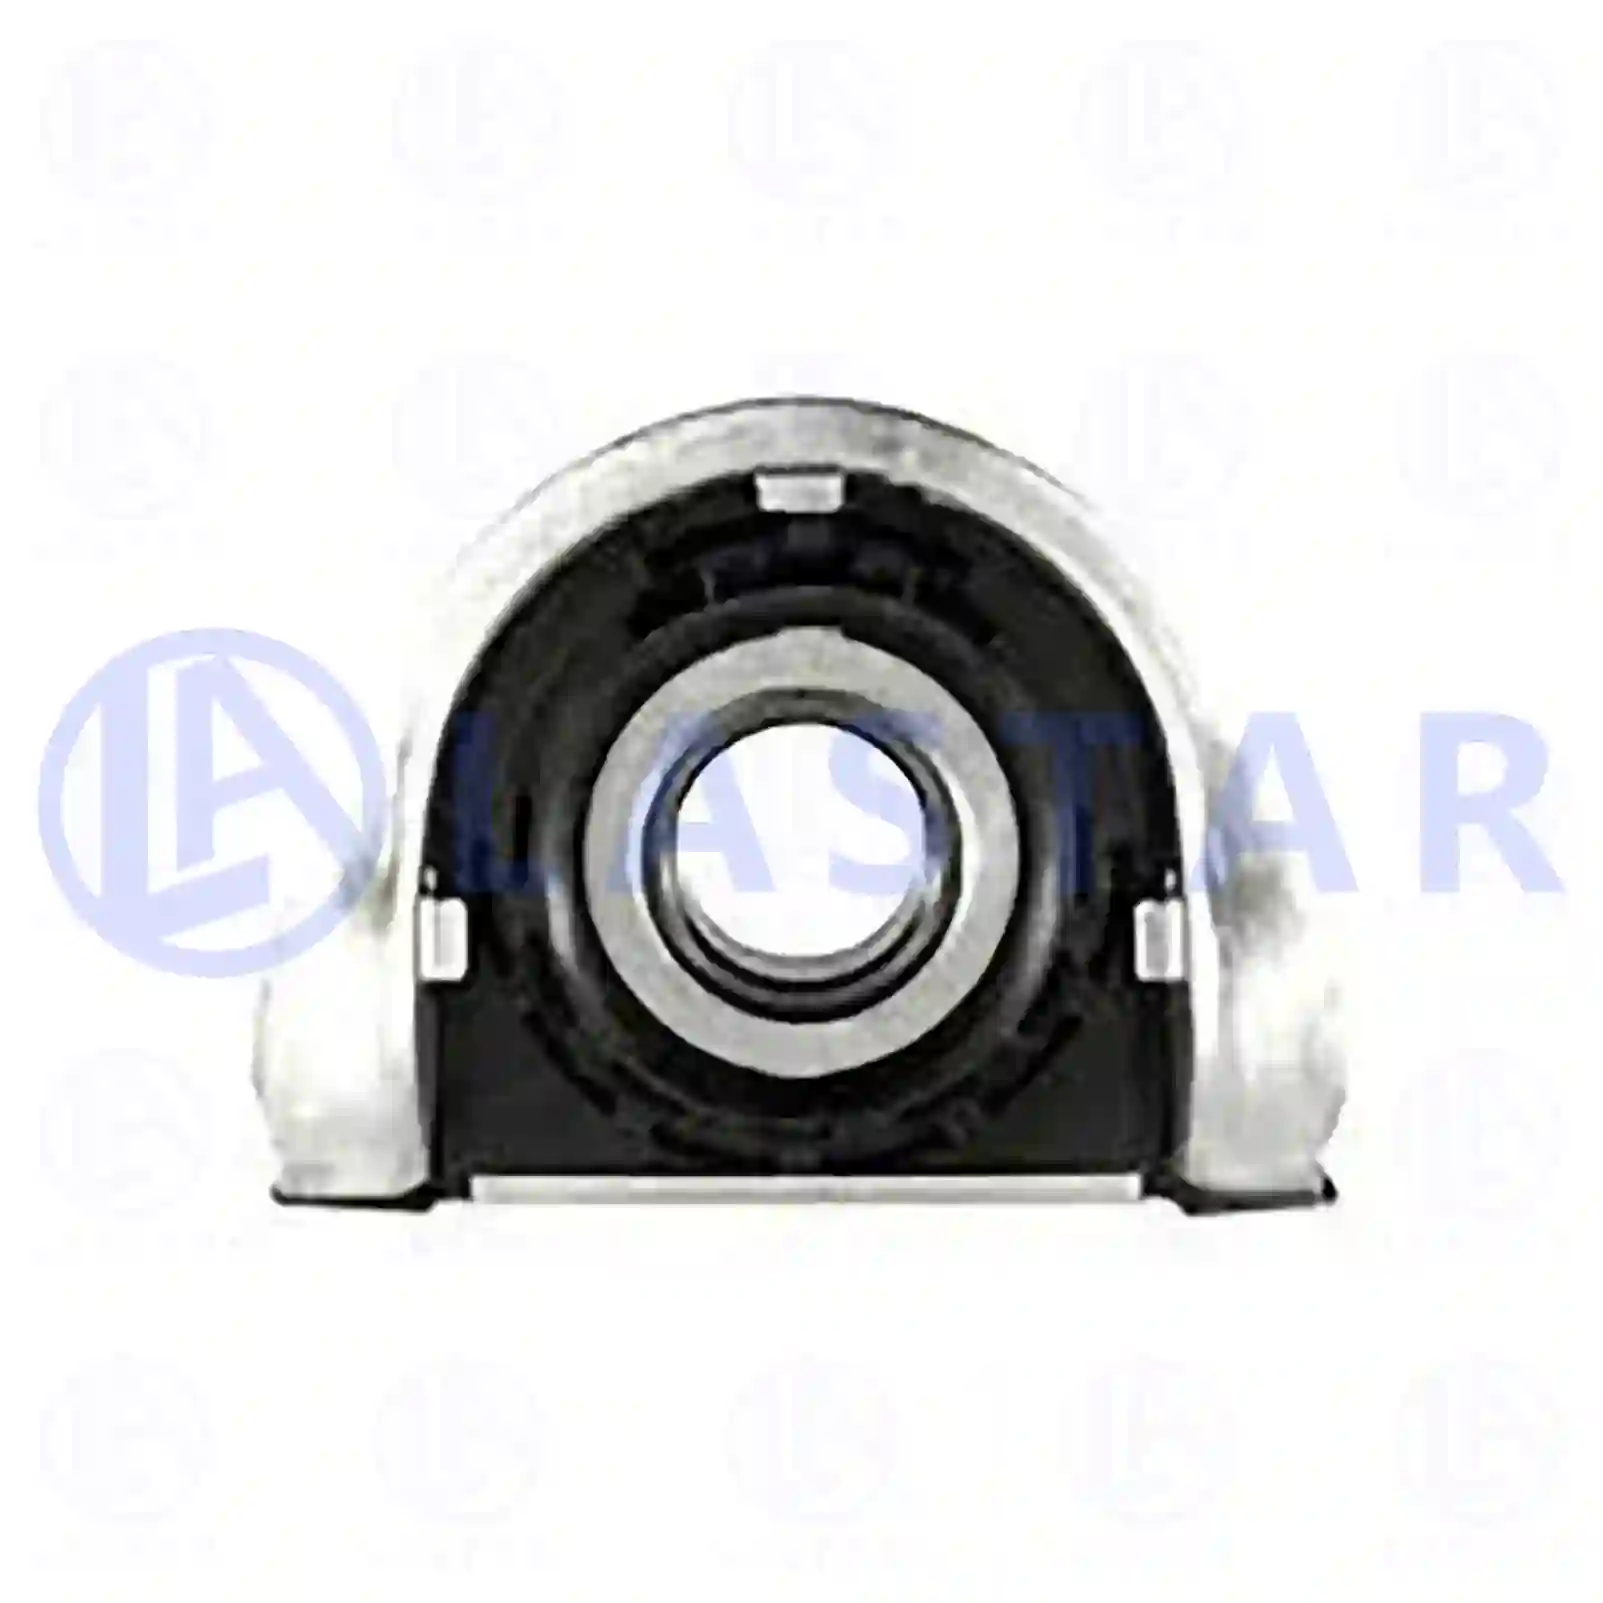 Center bearing, 77734140, 8127224 ||  77734140 Lastar Spare Part | Truck Spare Parts, Auotomotive Spare Parts Center bearing, 77734140, 8127224 ||  77734140 Lastar Spare Part | Truck Spare Parts, Auotomotive Spare Parts